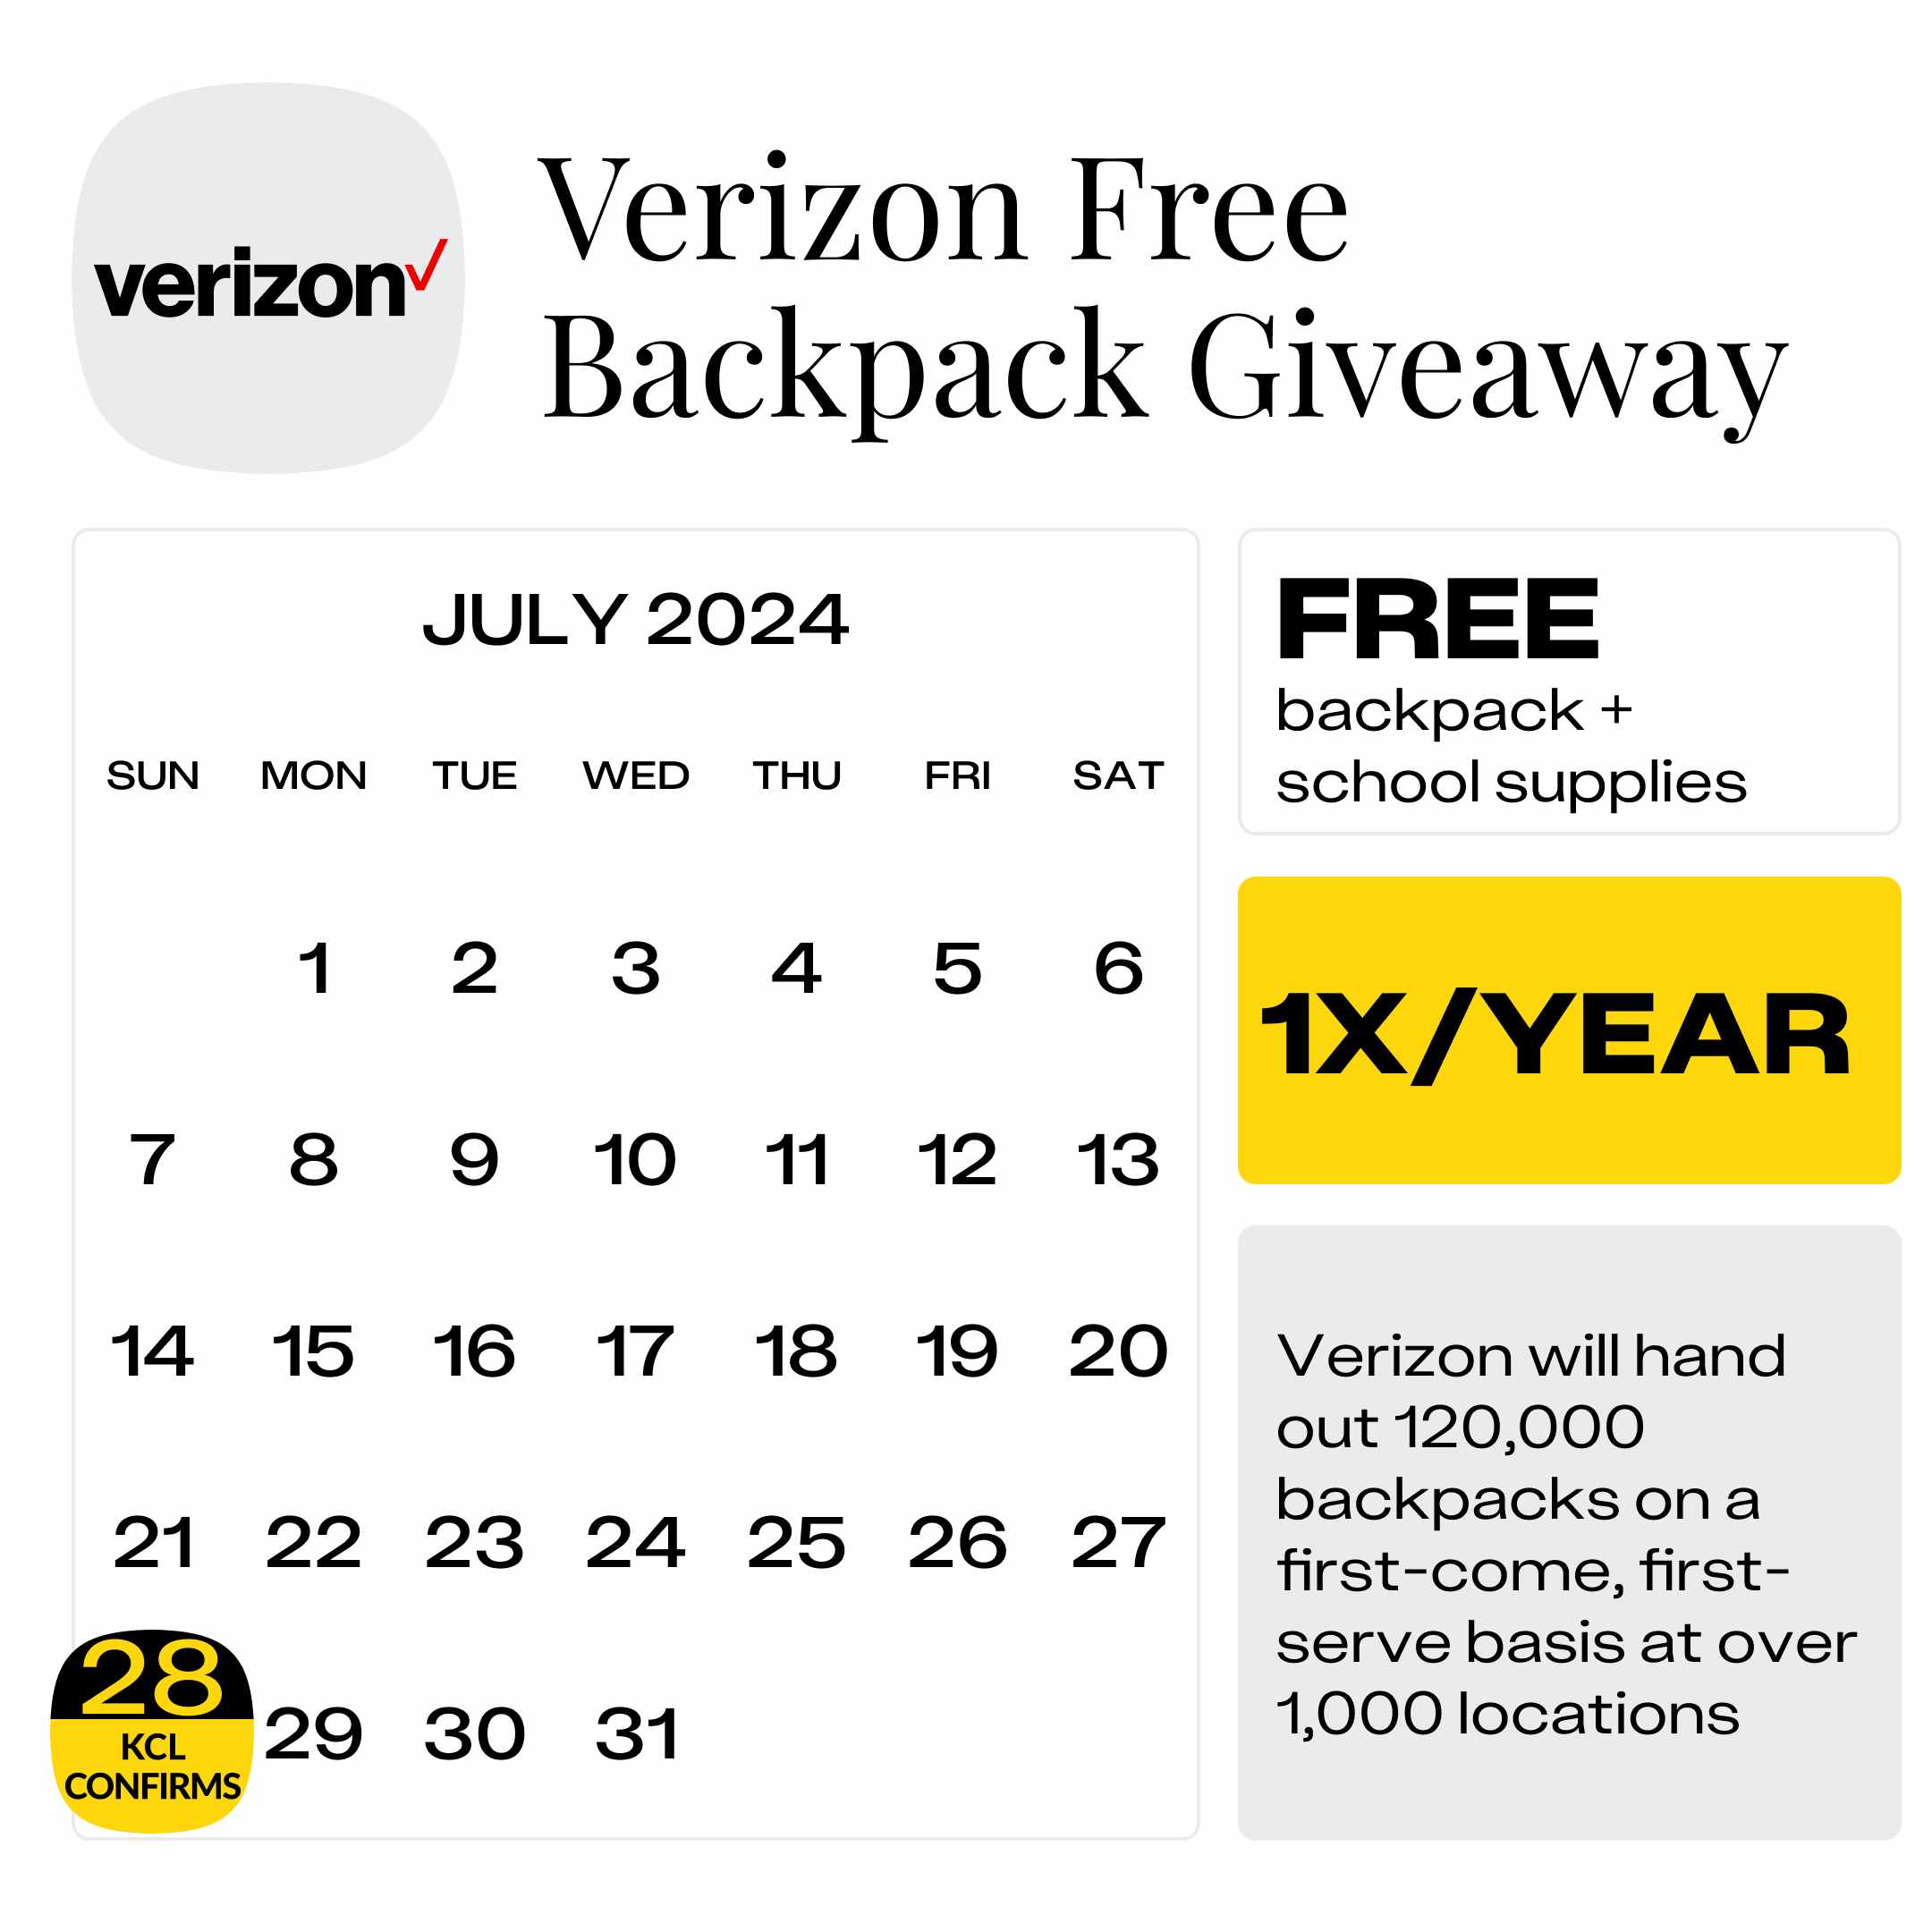 Verizon-Free-Backpack-Giveaway-2024-retail-event-calendar-kcl